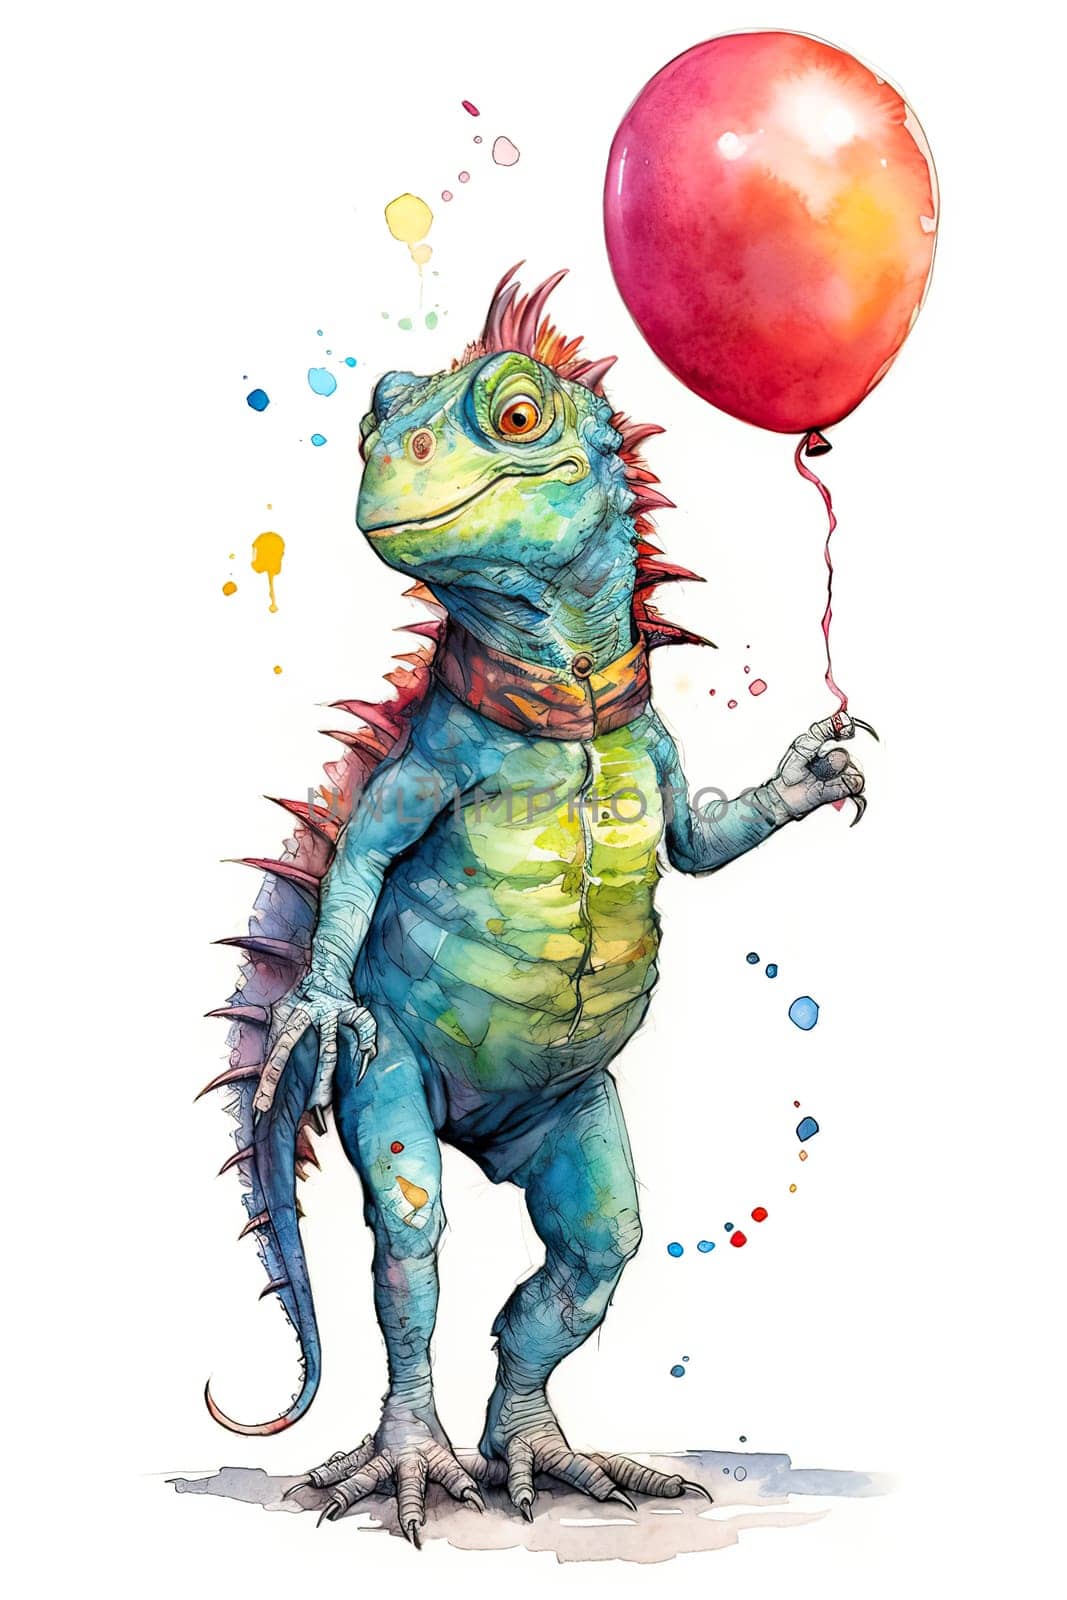 watercolor illustration of an iguana with balloons by Alla_Morozova93